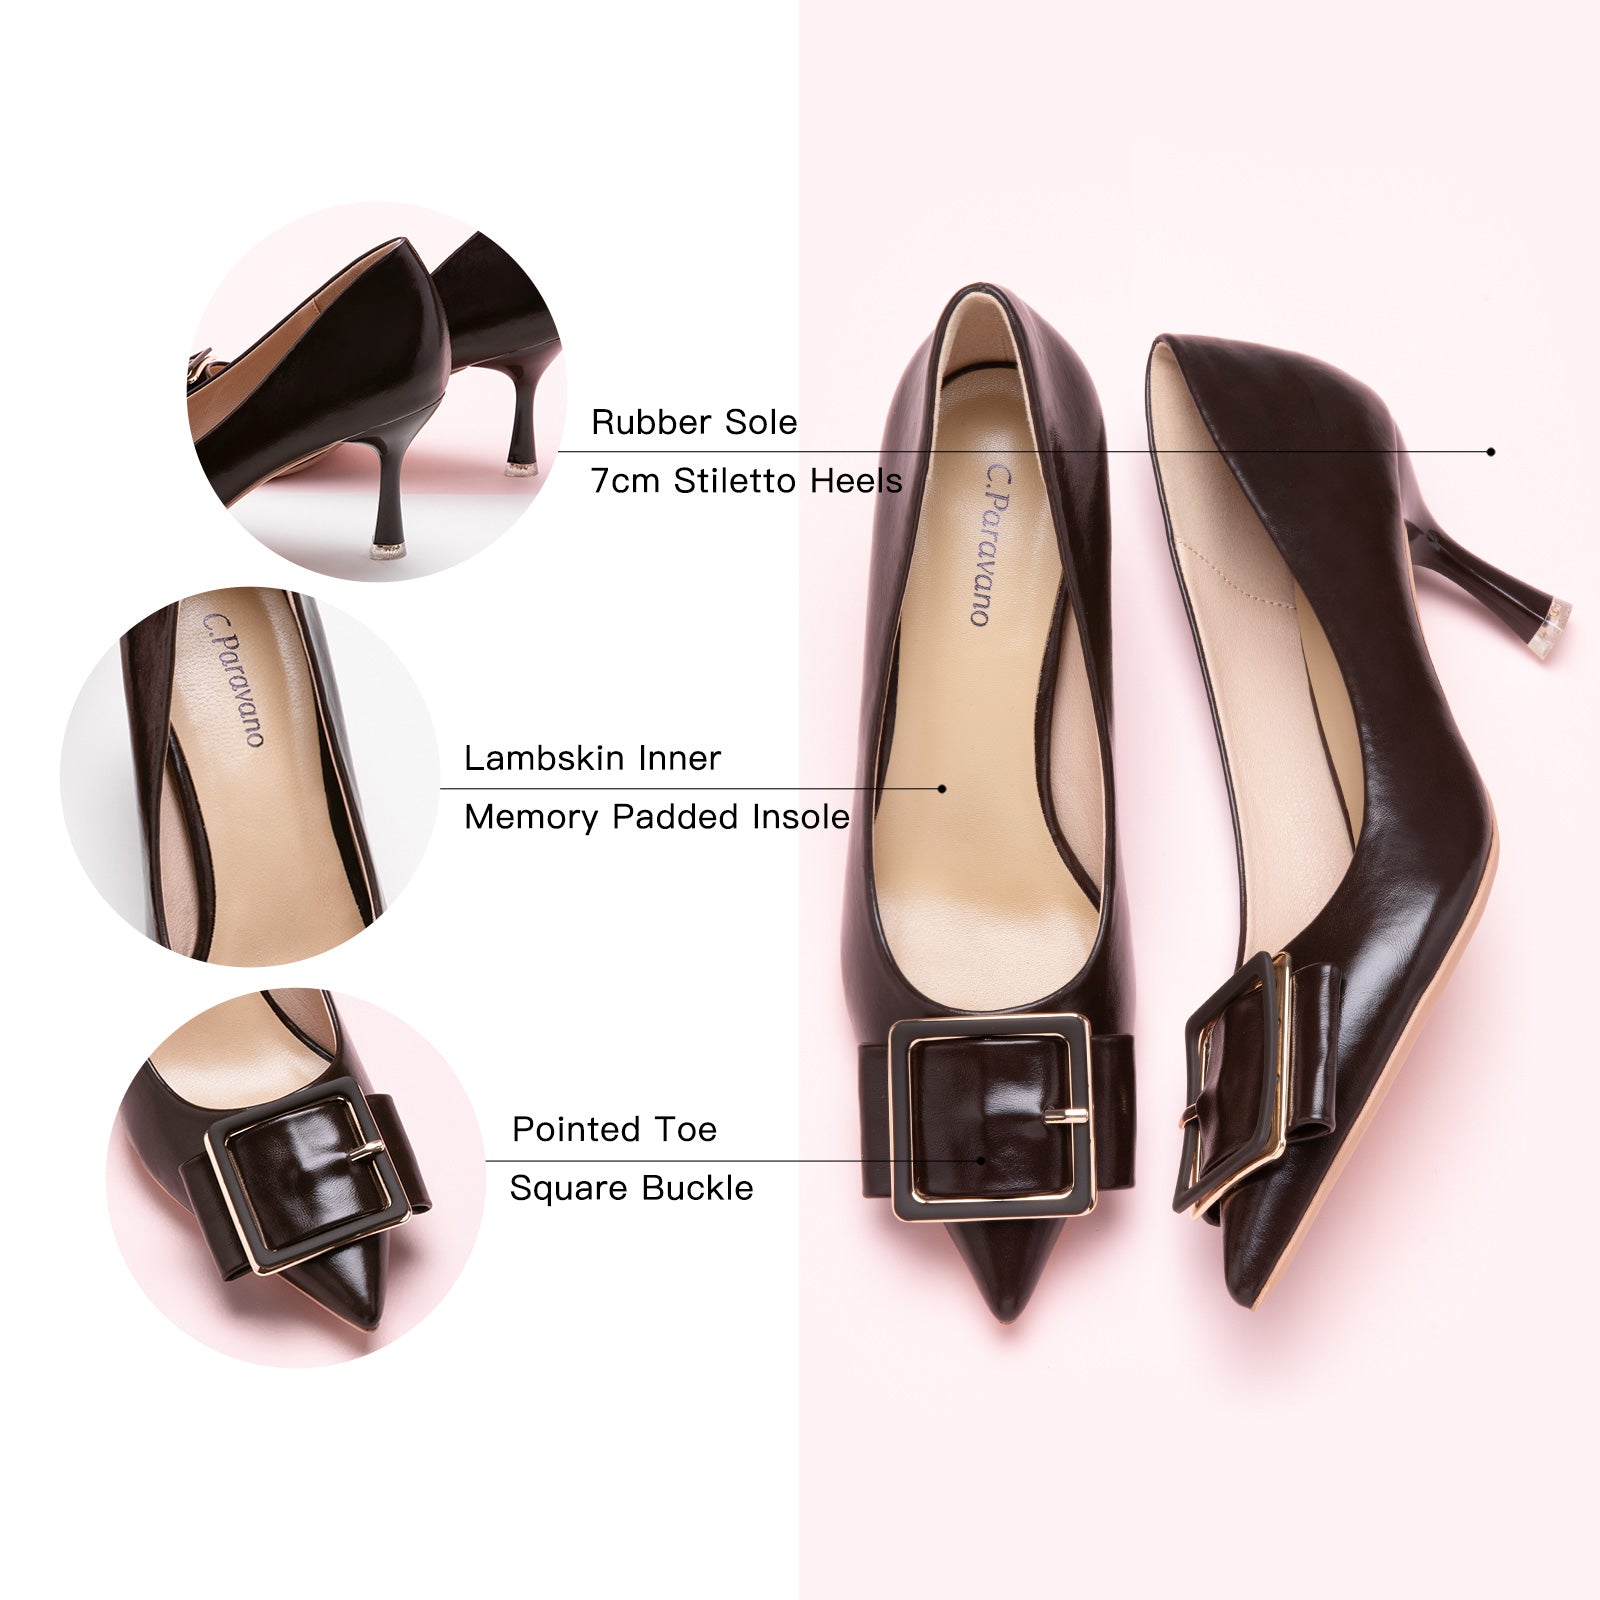 Rich Chocolate Tones: Elegant Square Buckled Pumps in Chocolate, a warm and sophisticated choice 